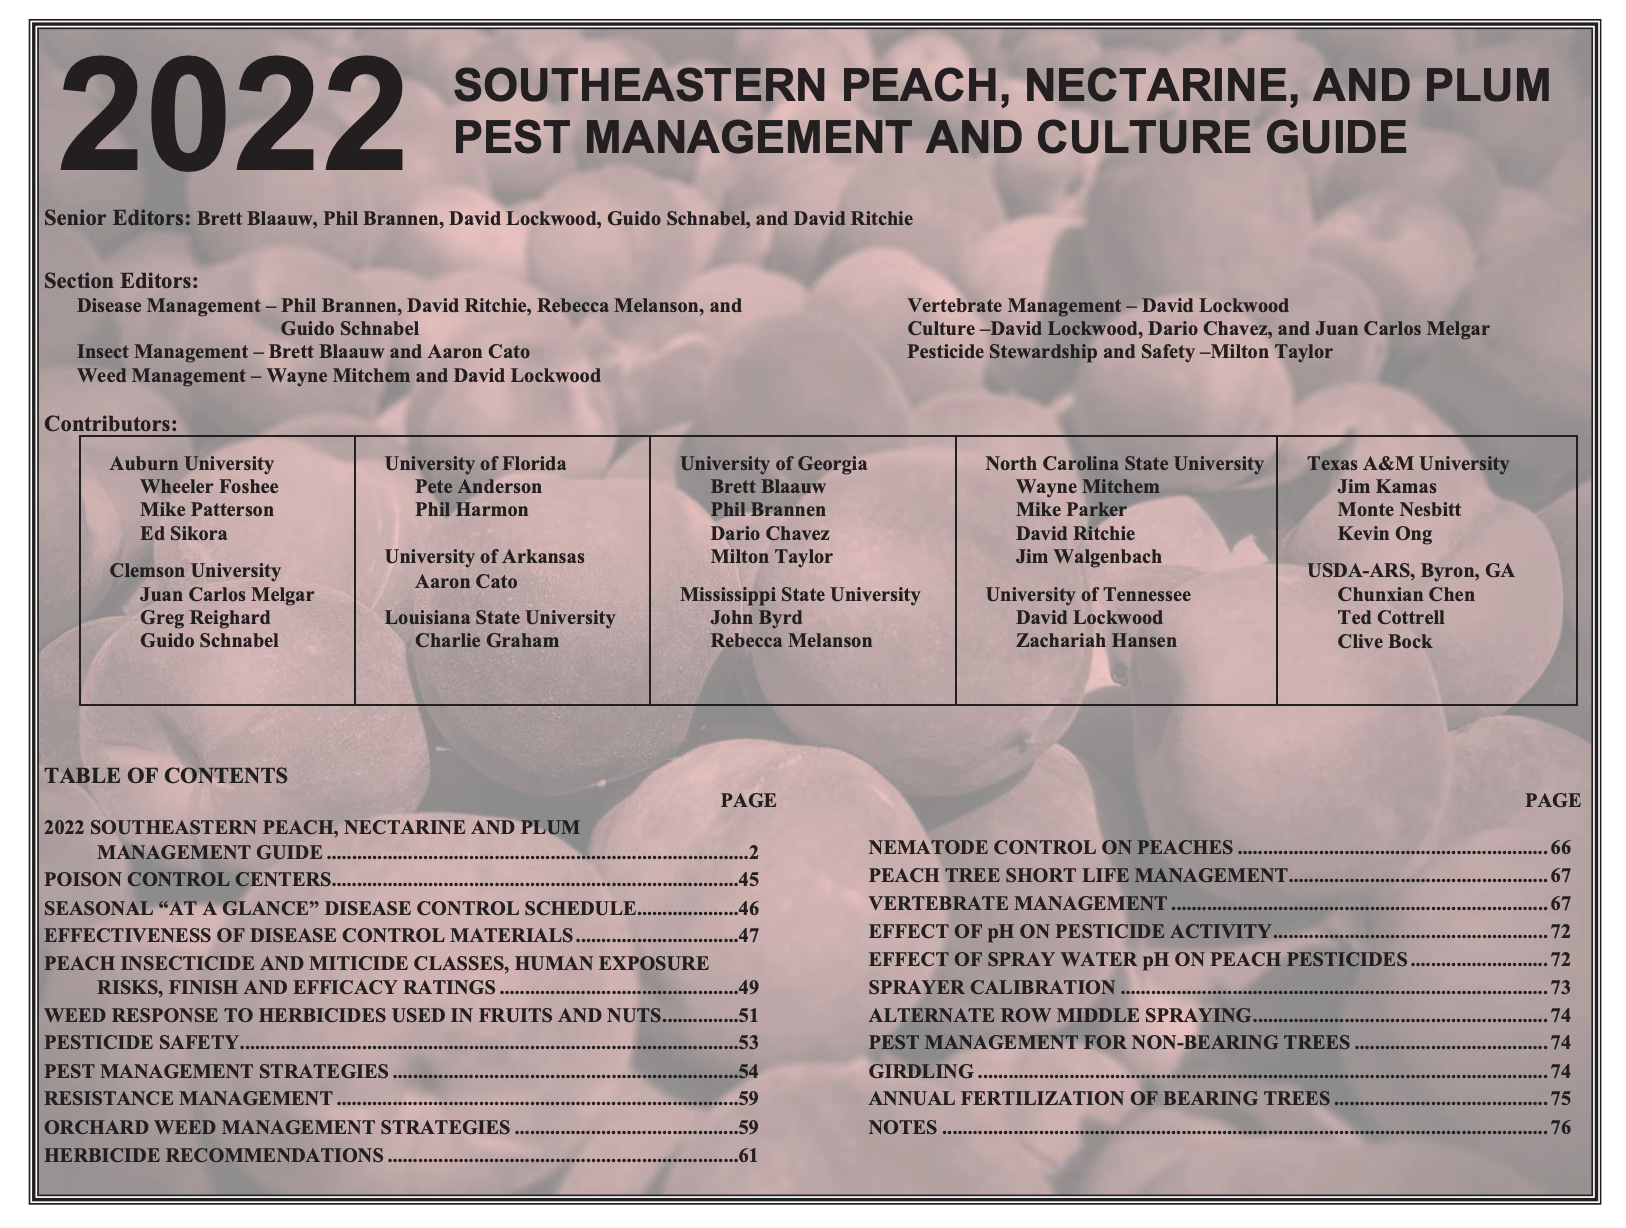 Image of the front page of the 2022 peach, nectarine and plum southeastern management guide